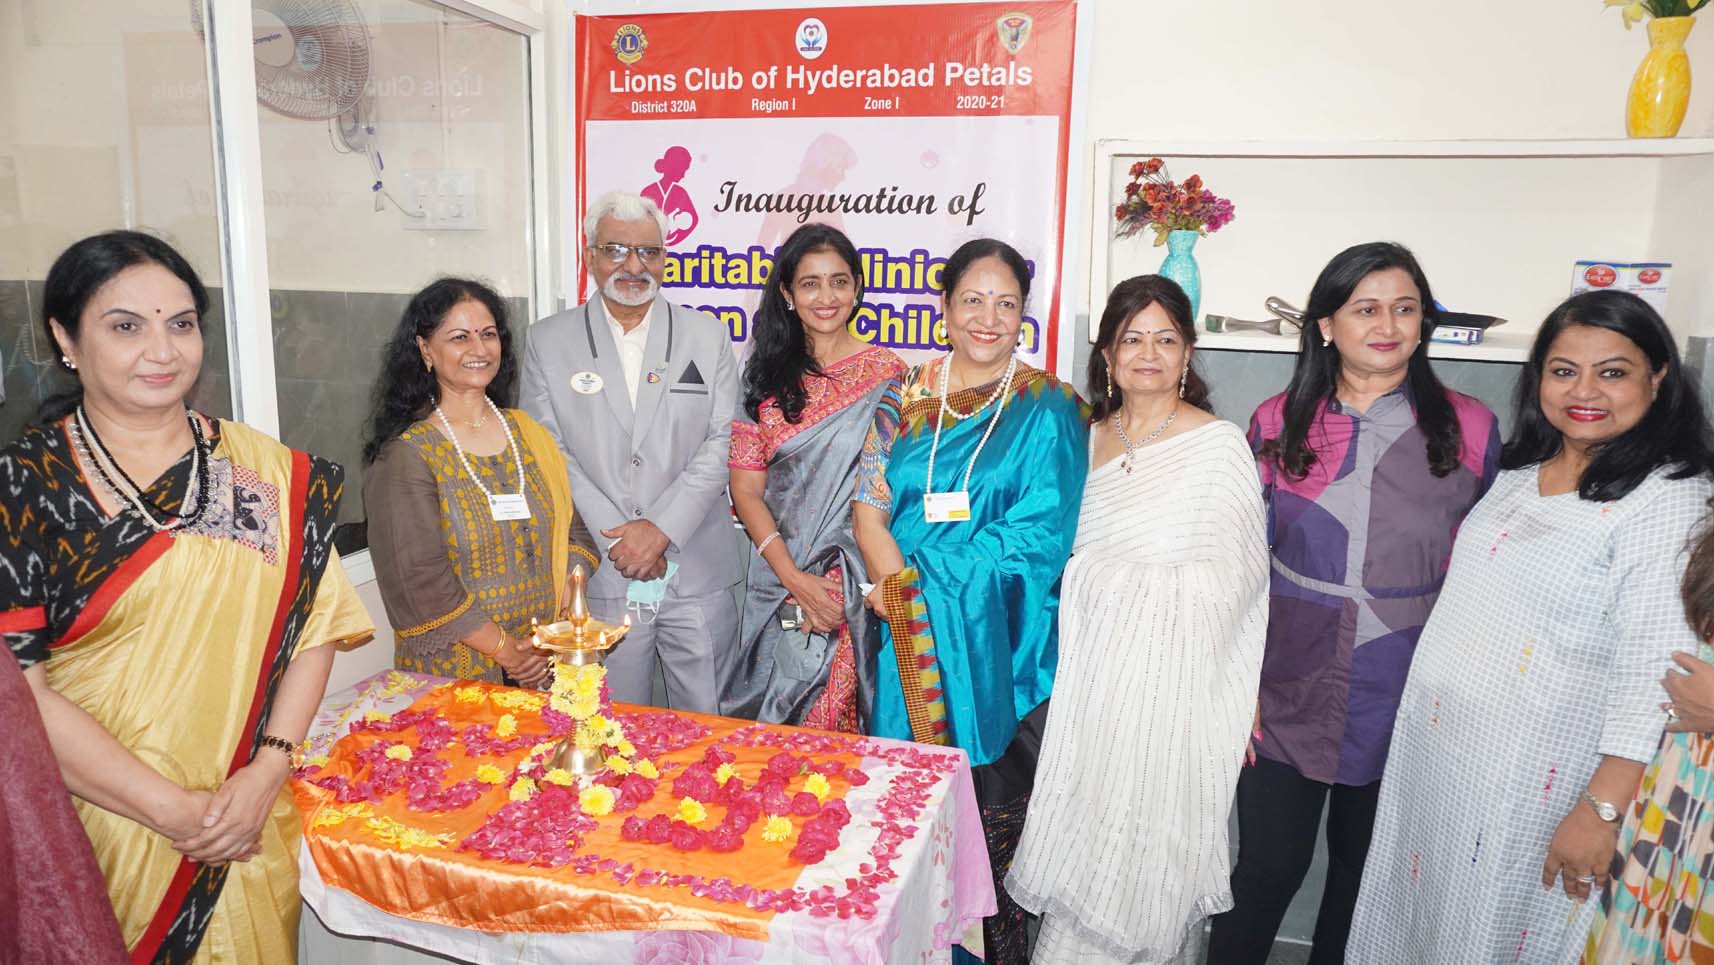 Charitable Clinic for Women and Children of Slum areas inaugurated